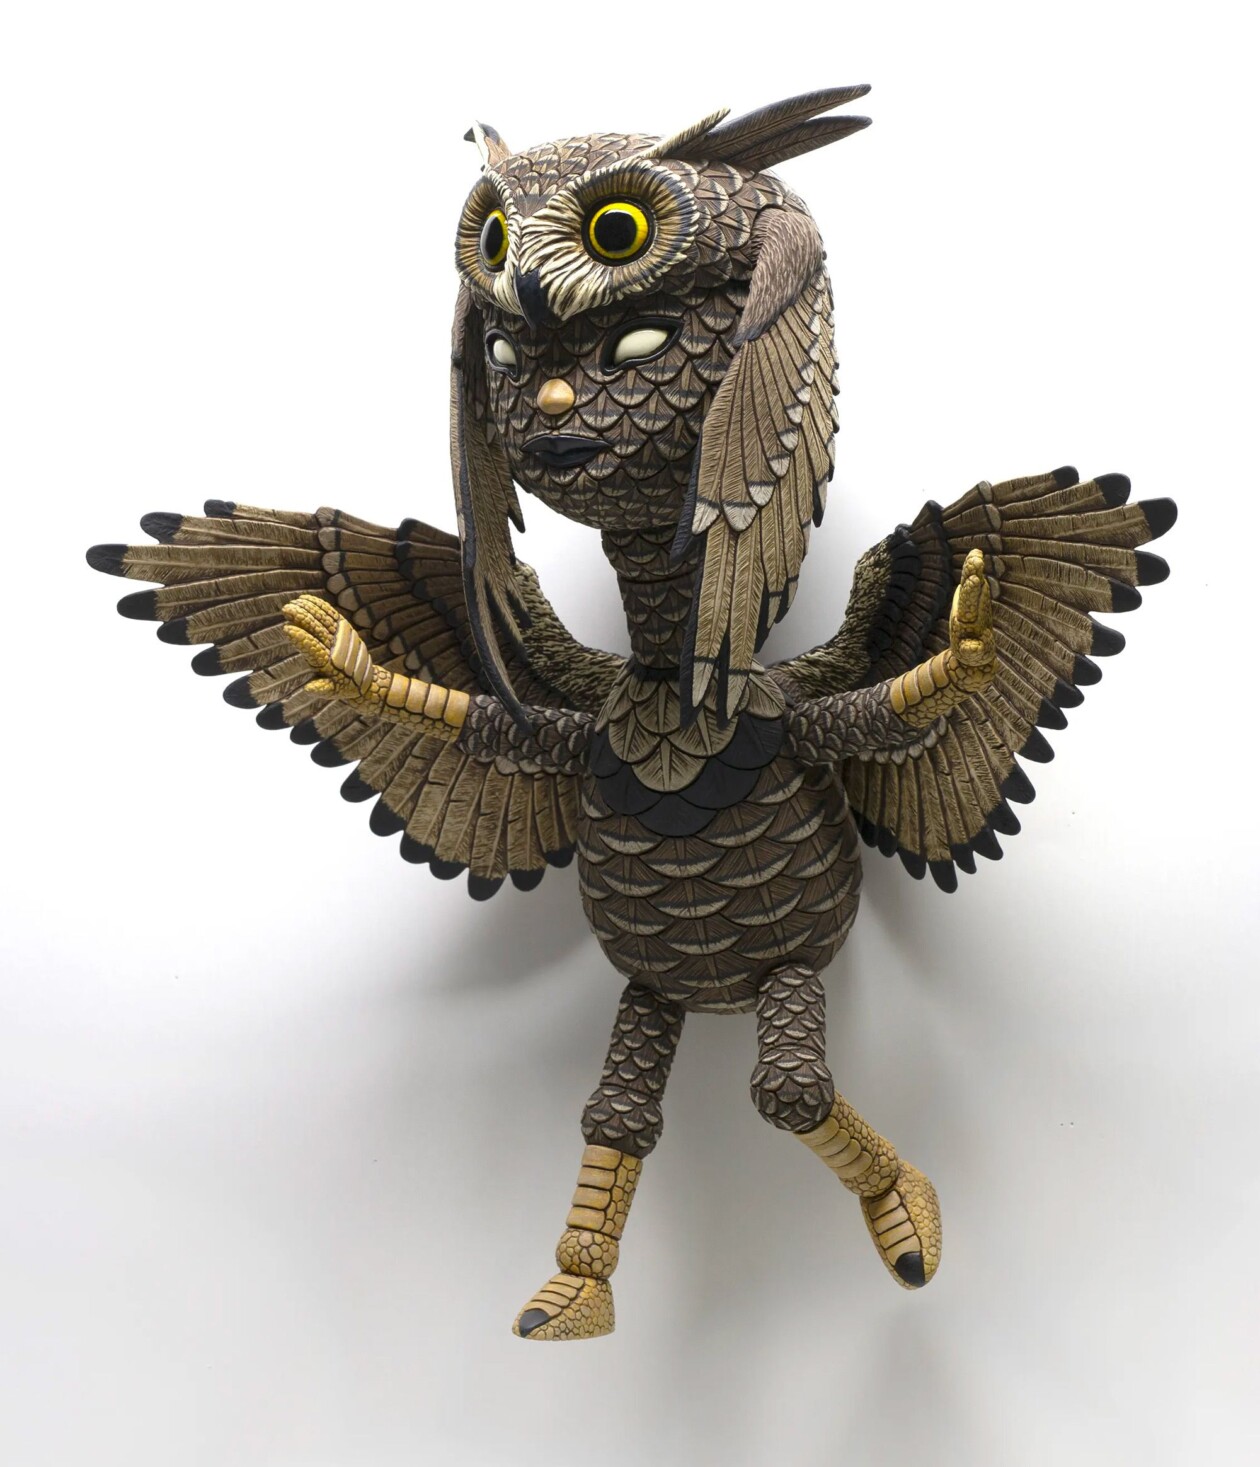 Marvelous Anthropomorphized Bird Sculptures By Calvin Ma (10)